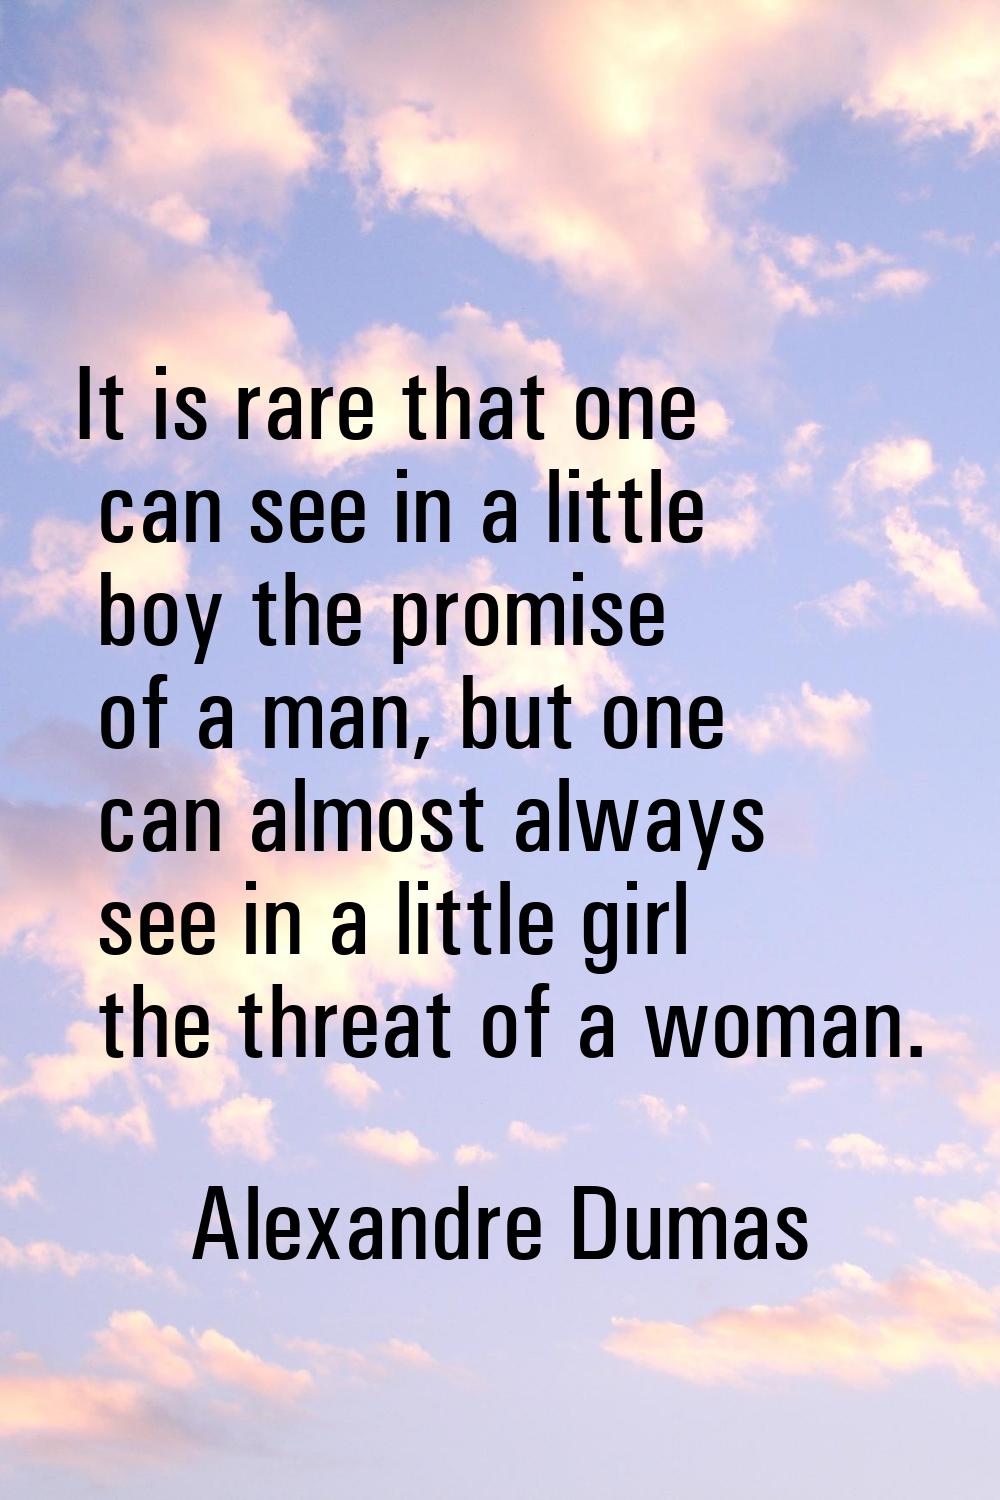 It is rare that one can see in a little boy the promise of a man, but one can almost always see in 